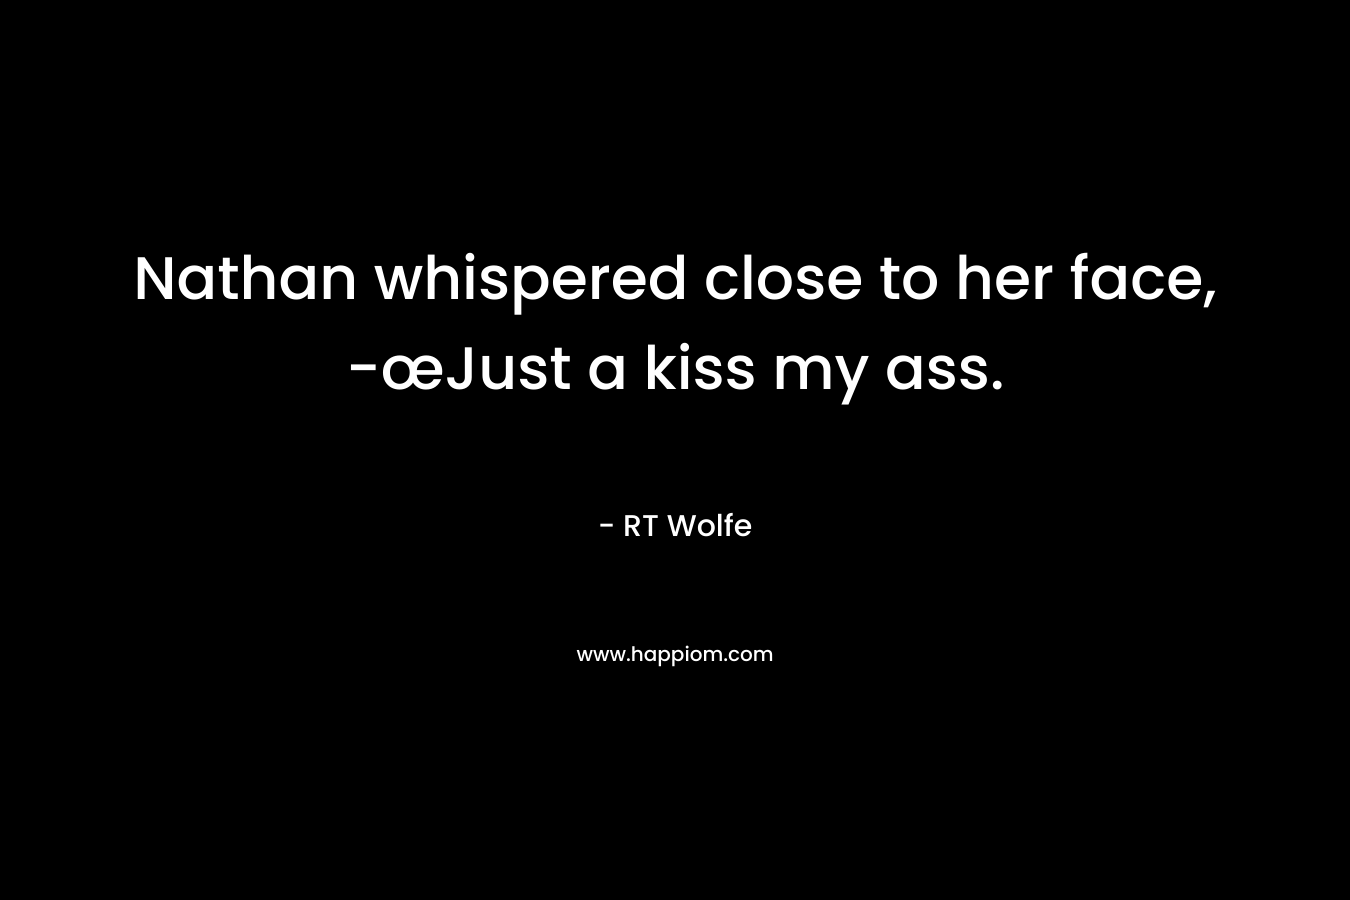 Nathan whispered close to her face, -œJust a kiss my ass. – RT Wolfe